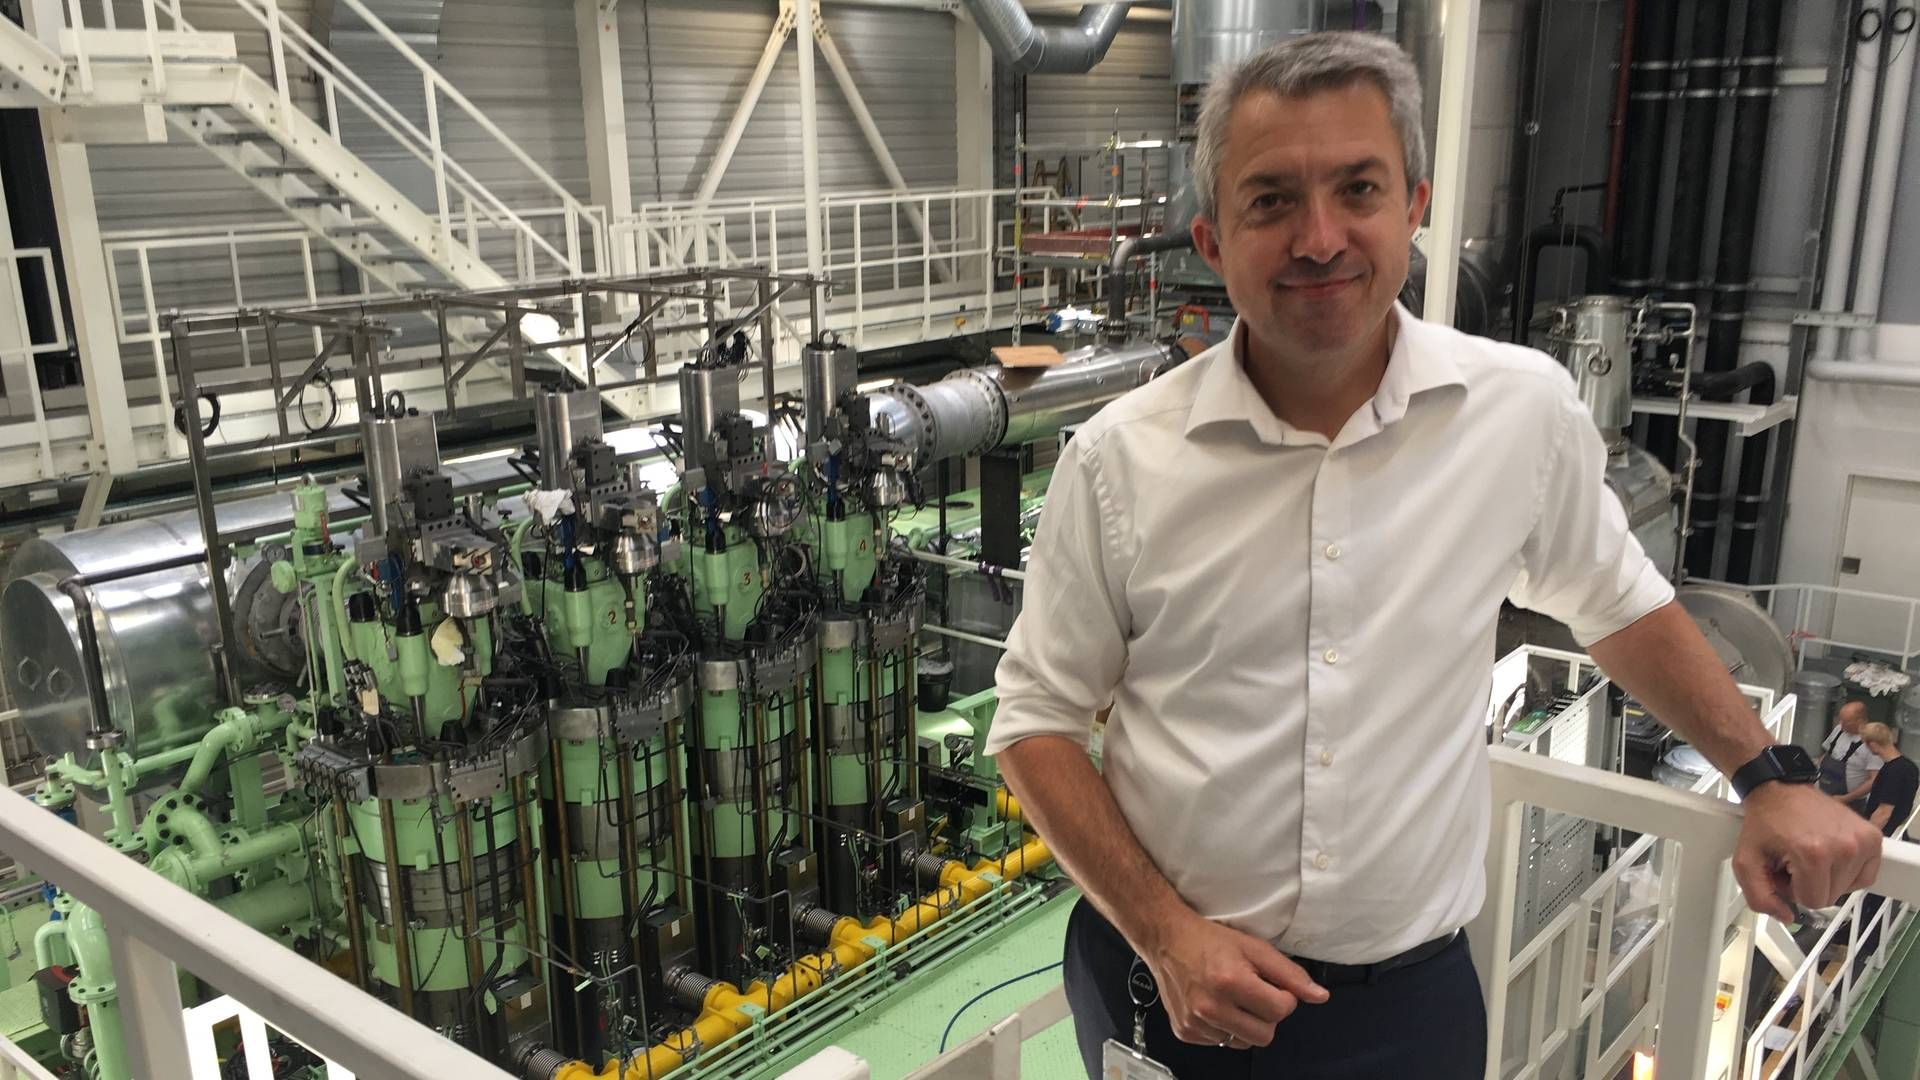 Brian Østergaard Sørensen, head of R&D for two-stroke engines at MAN, in front of a new test engine, which MAN will use in the development of ship engines. | Photo: ShippingWatch